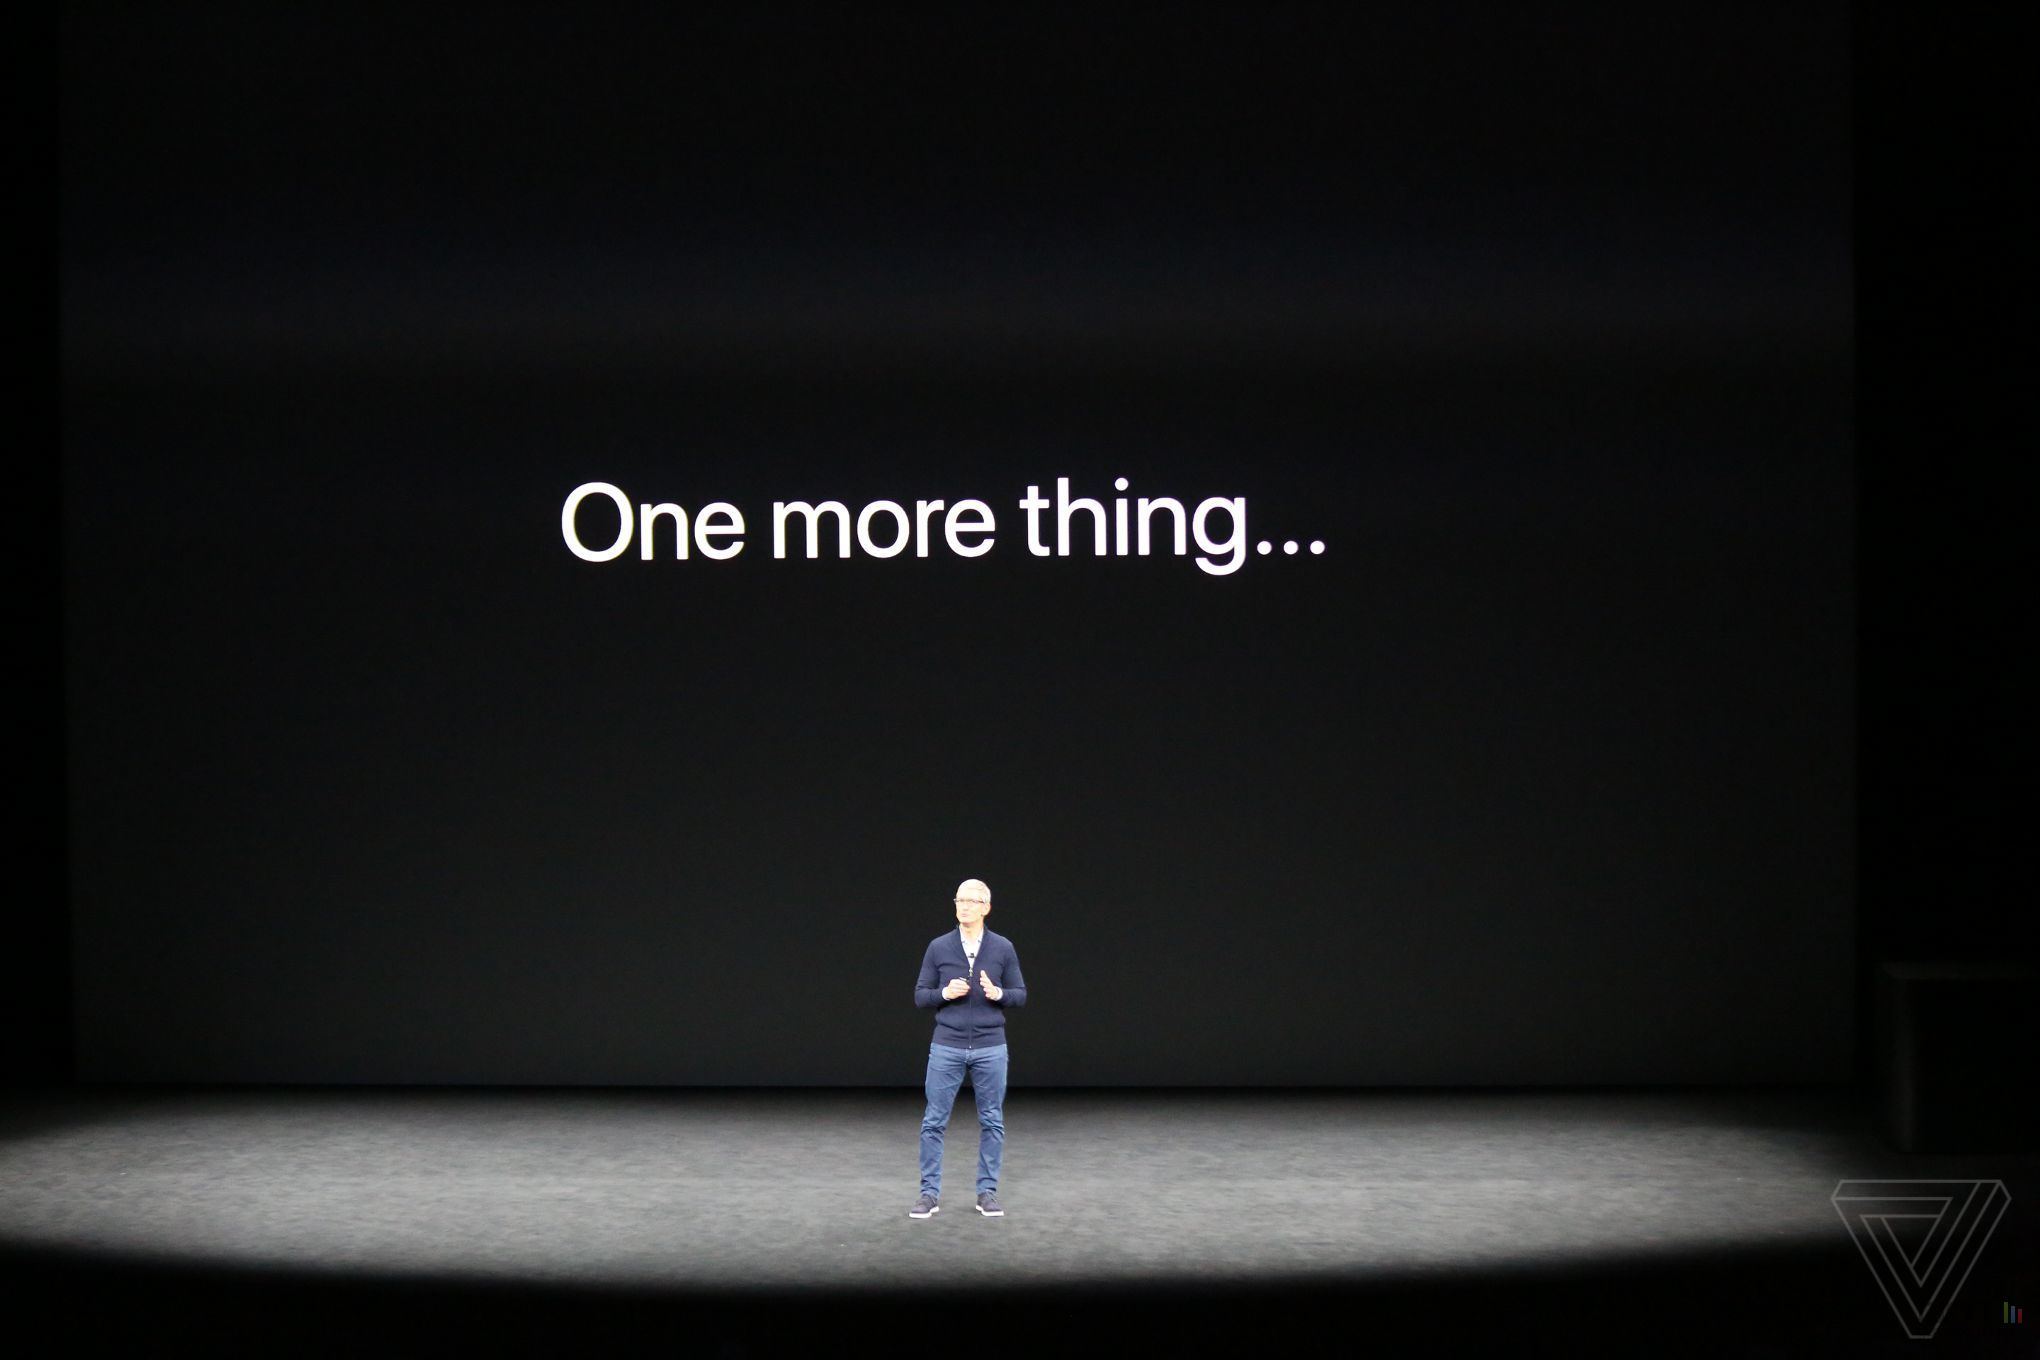 One more stand. One more thing. Презентация Apple one more thing. One more thing Стив Джобс. Презентация Apple слайды.